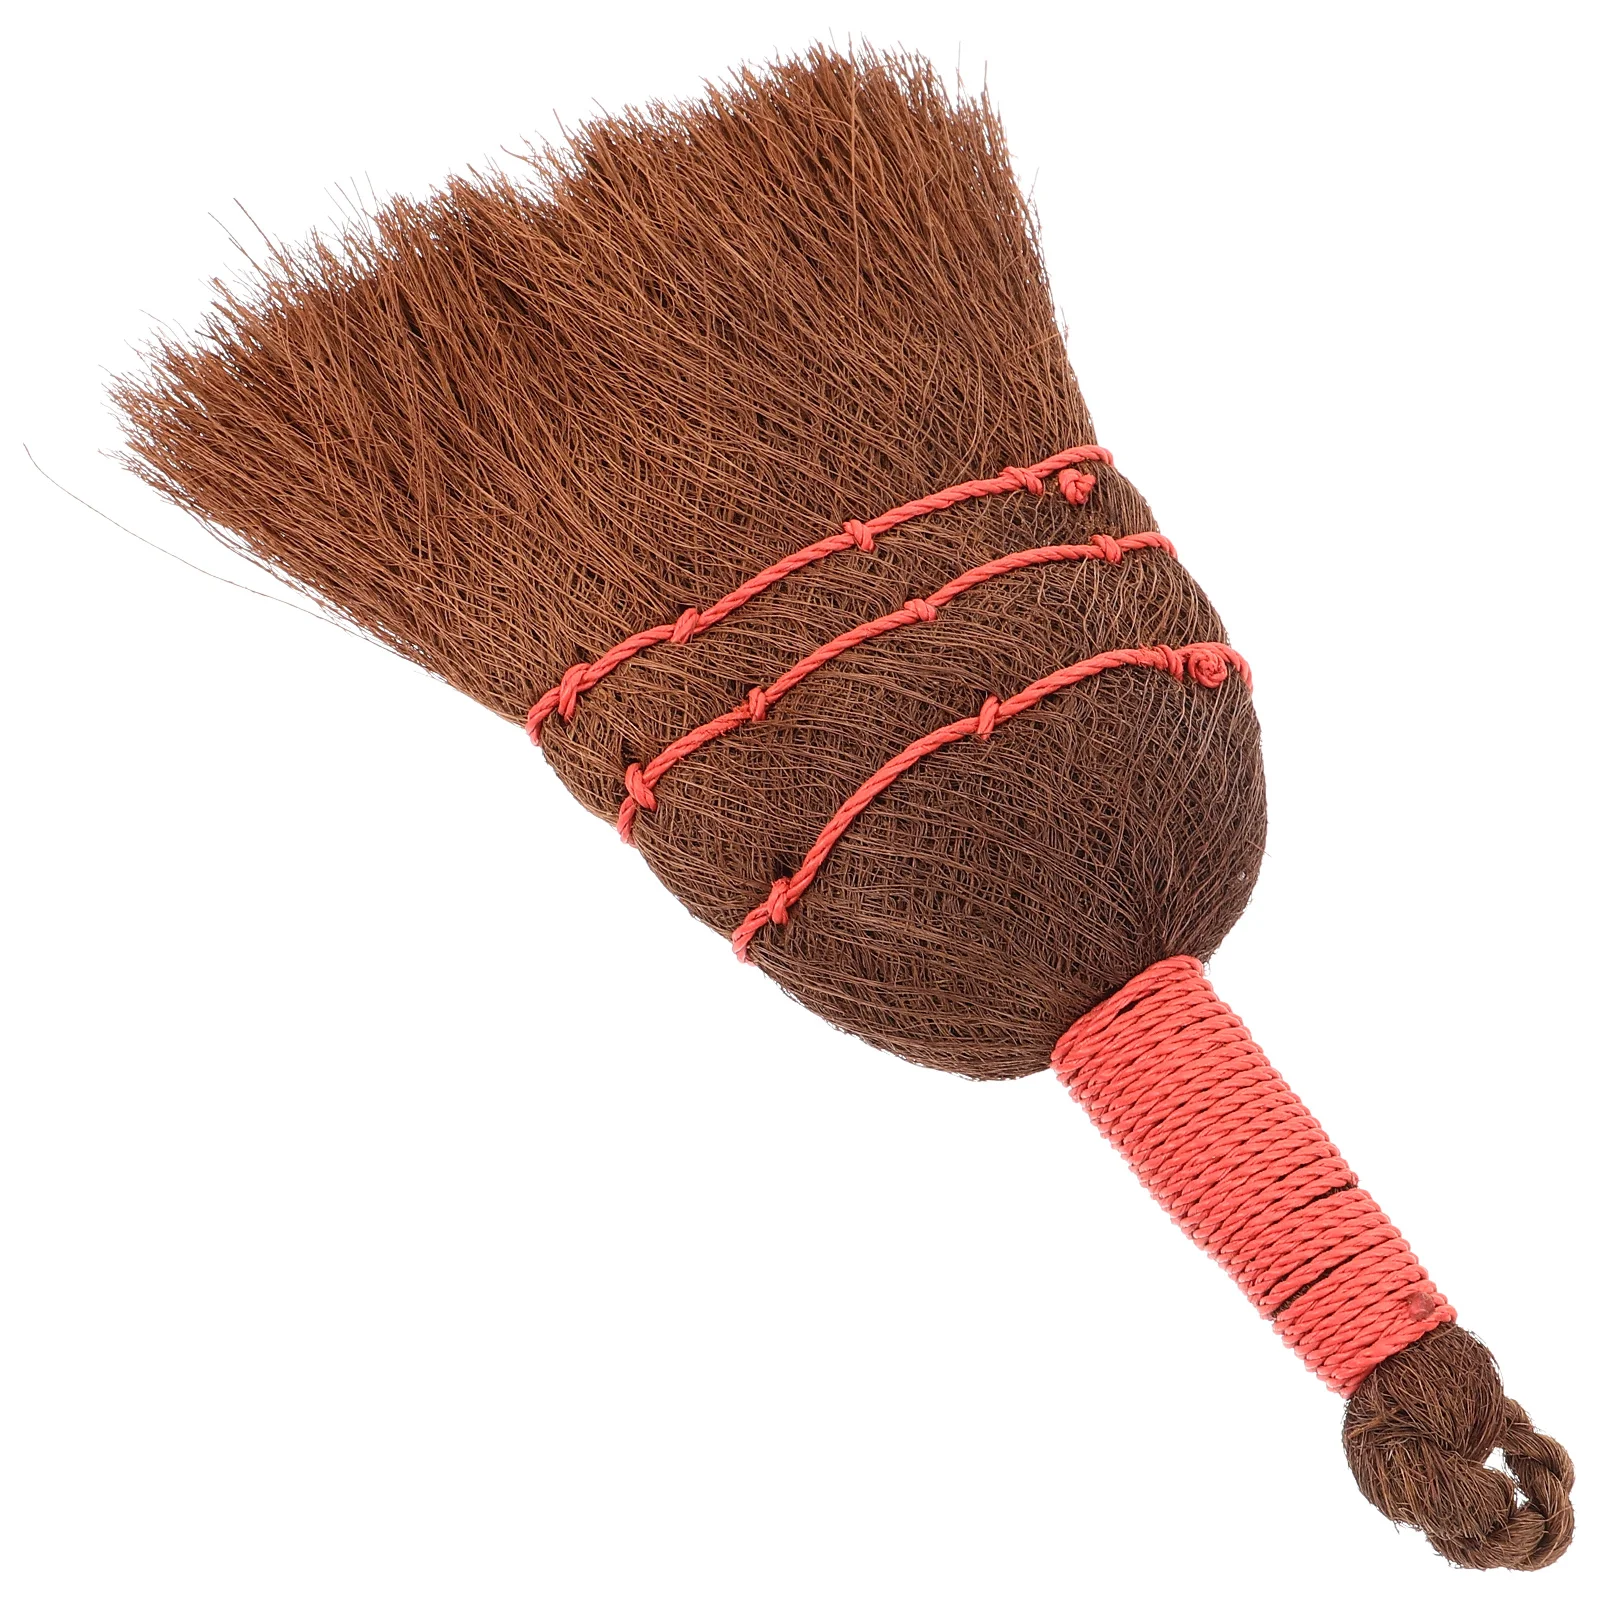 

Desktop Dust Broom Household Palm Office Garden Hand Fork Tools Small Cleaning Brooms Brown Brush